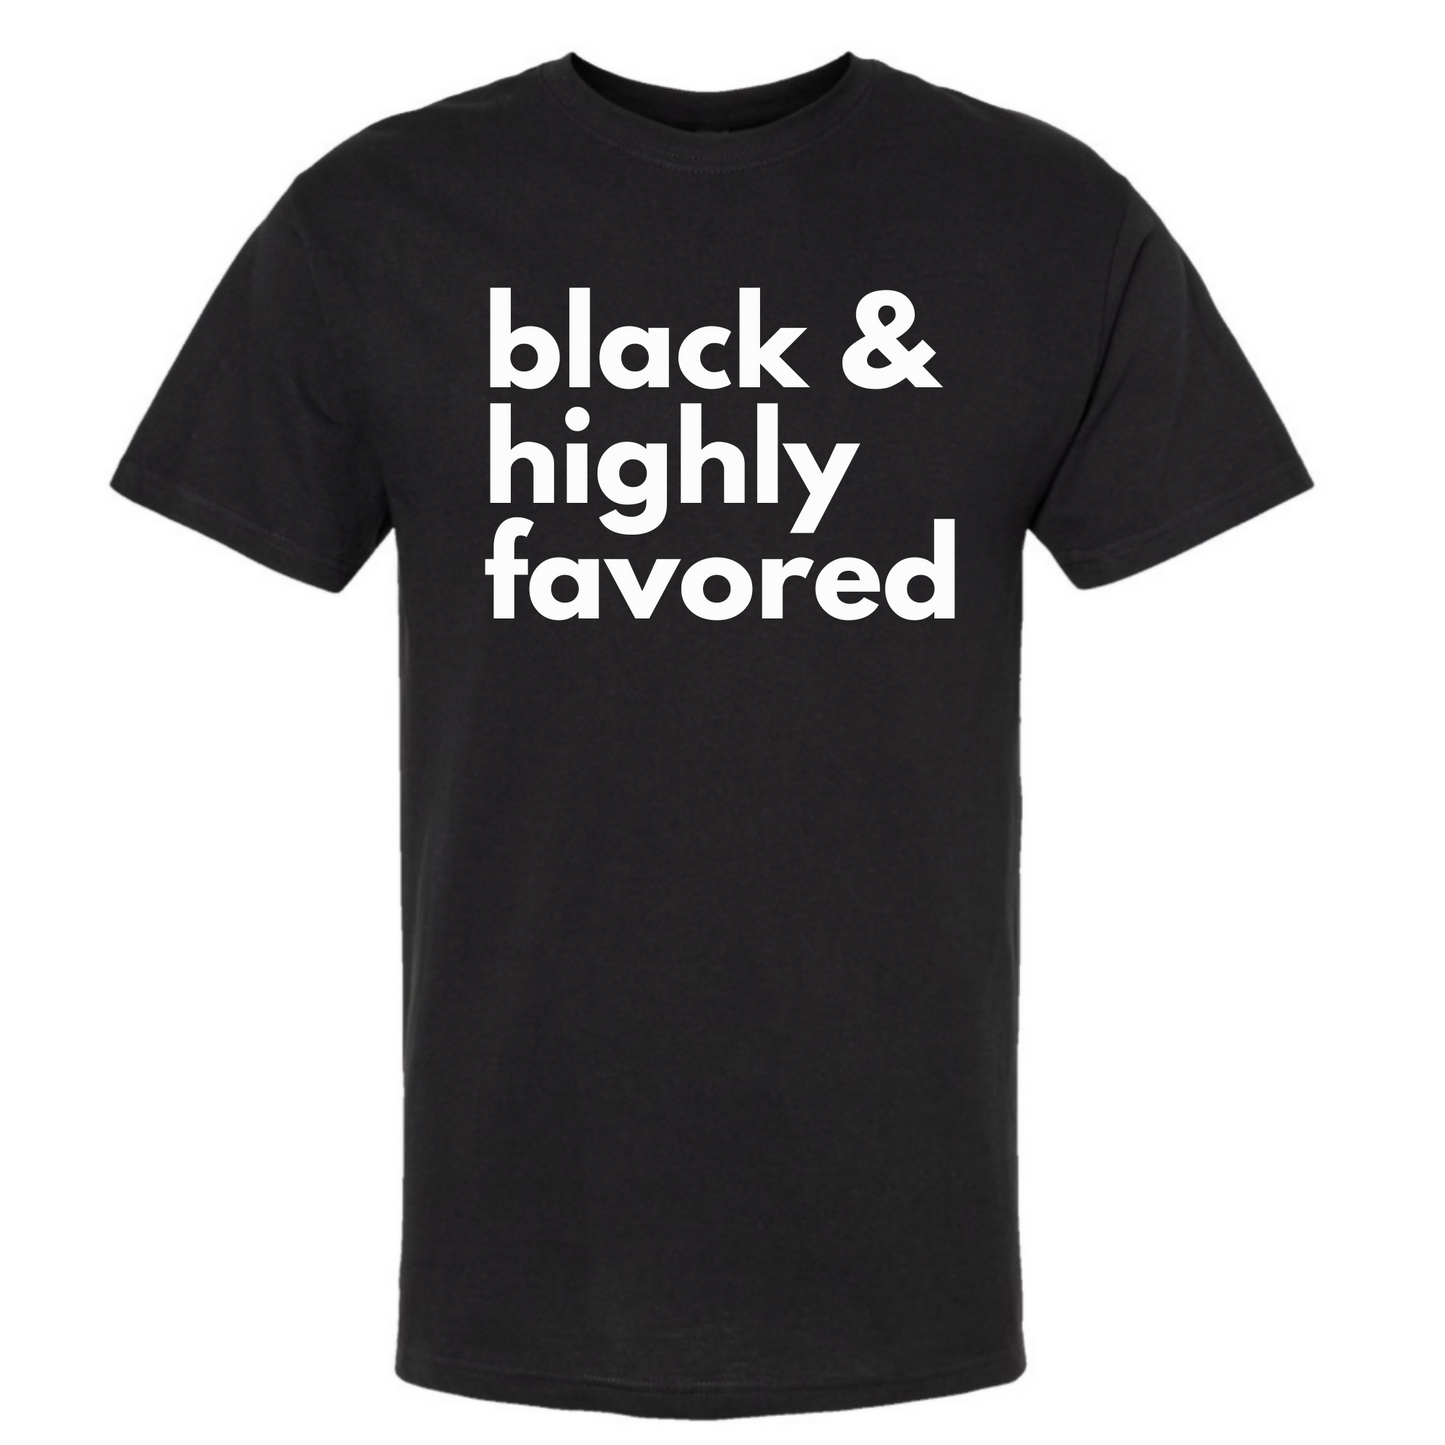 "HIGHLY FAVORED" UNISEX T-SHIRT